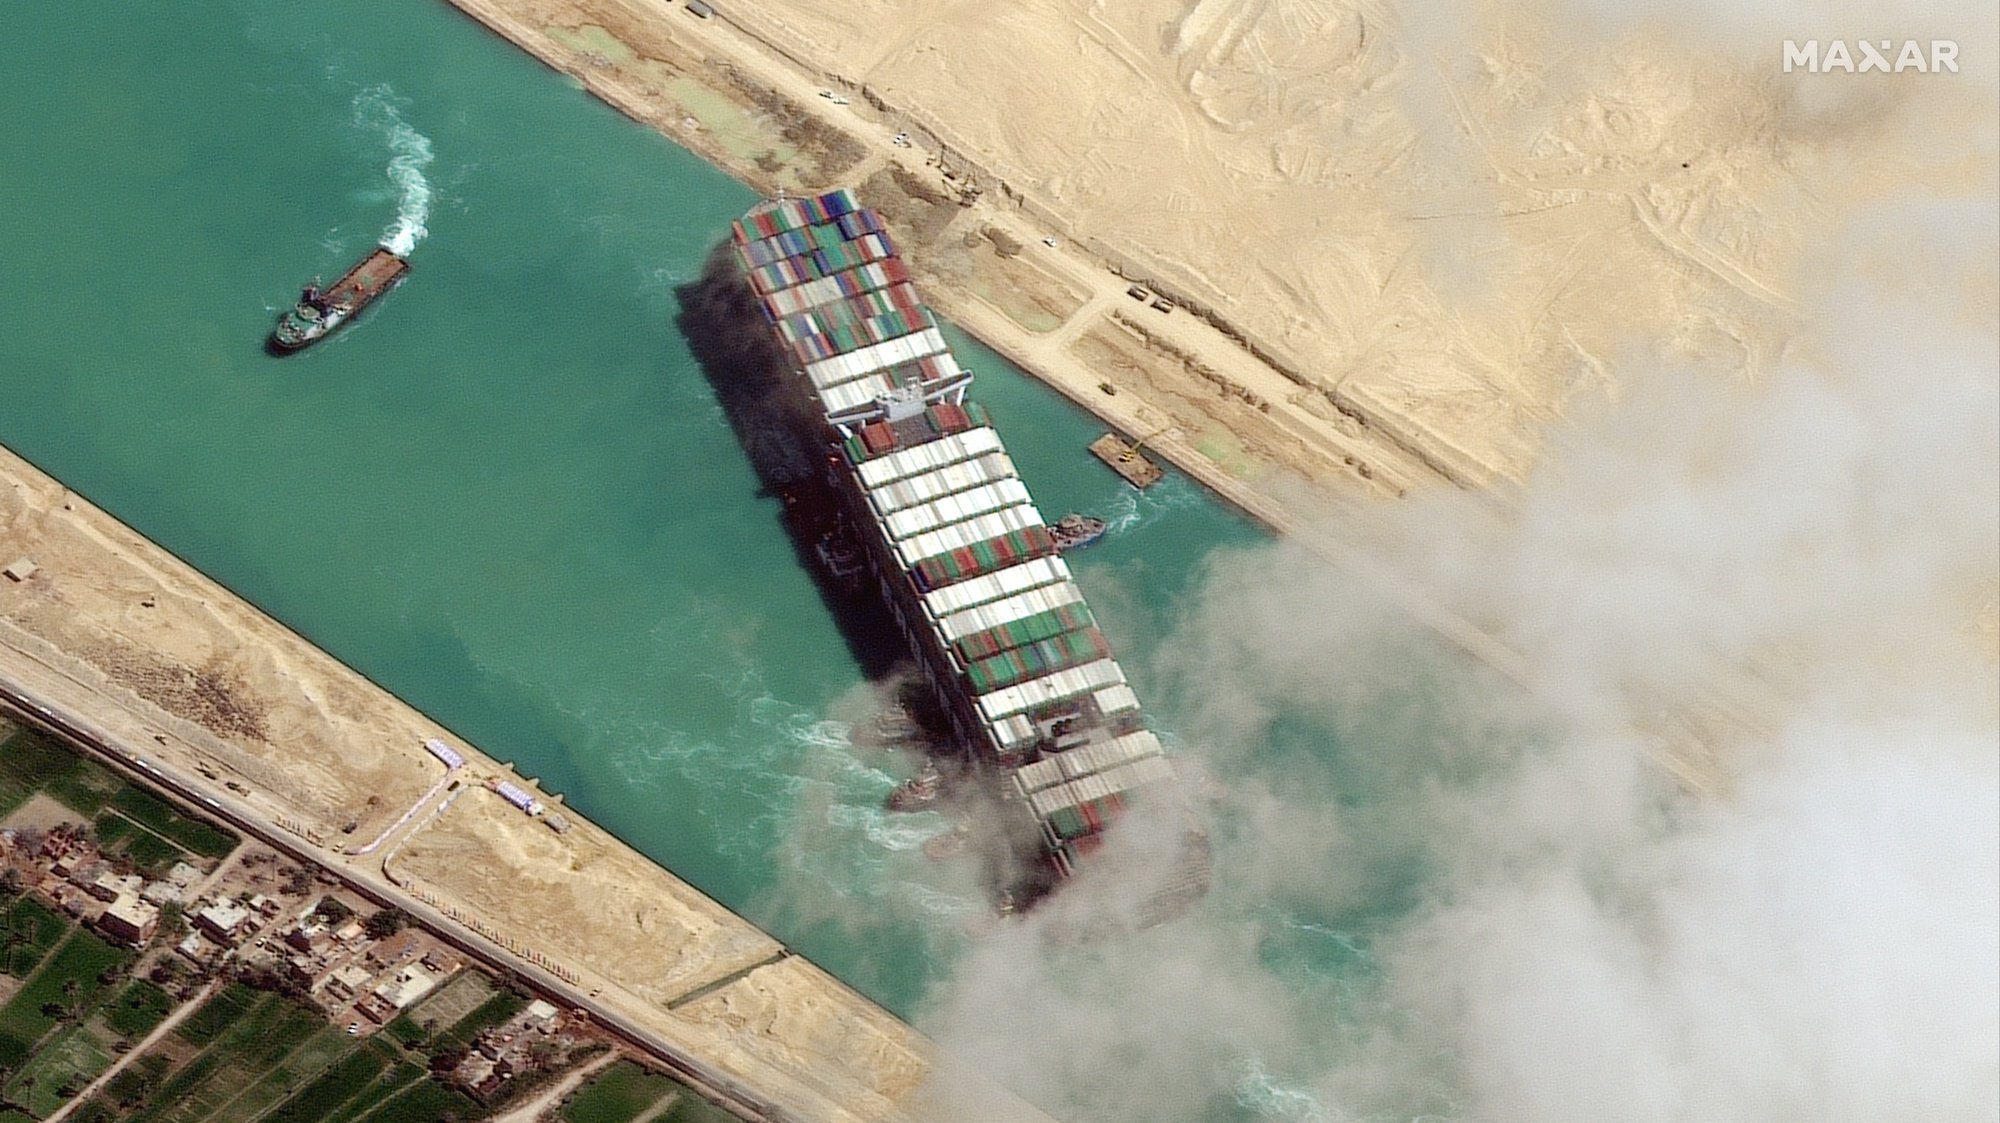 epa09105221 A handout satellite image made available by MAXAR Technologies shows , the Ever Given container ship after it has been moved away from the eastern bank of the canal and tugboats trying to reposition the ship, in the Suez Canal, Egypt, 29 March 2021. The head of the Suez Canal Authority announced on 29 March that the large container ship, which ran aground in the Suez Canal on 23 March, is now free floating after responding to the pulling maneuvers.  EPA/MAXAR TECHNOLOGIES HANDOUT --MANDATORY CREDIT: SATELLITE IMAGE 2021 MAXAR TECHNOLOGIES -- the watermark may not be removed/cropped -- HANDOUT EDITORIAL USE ONLY/NO SALES